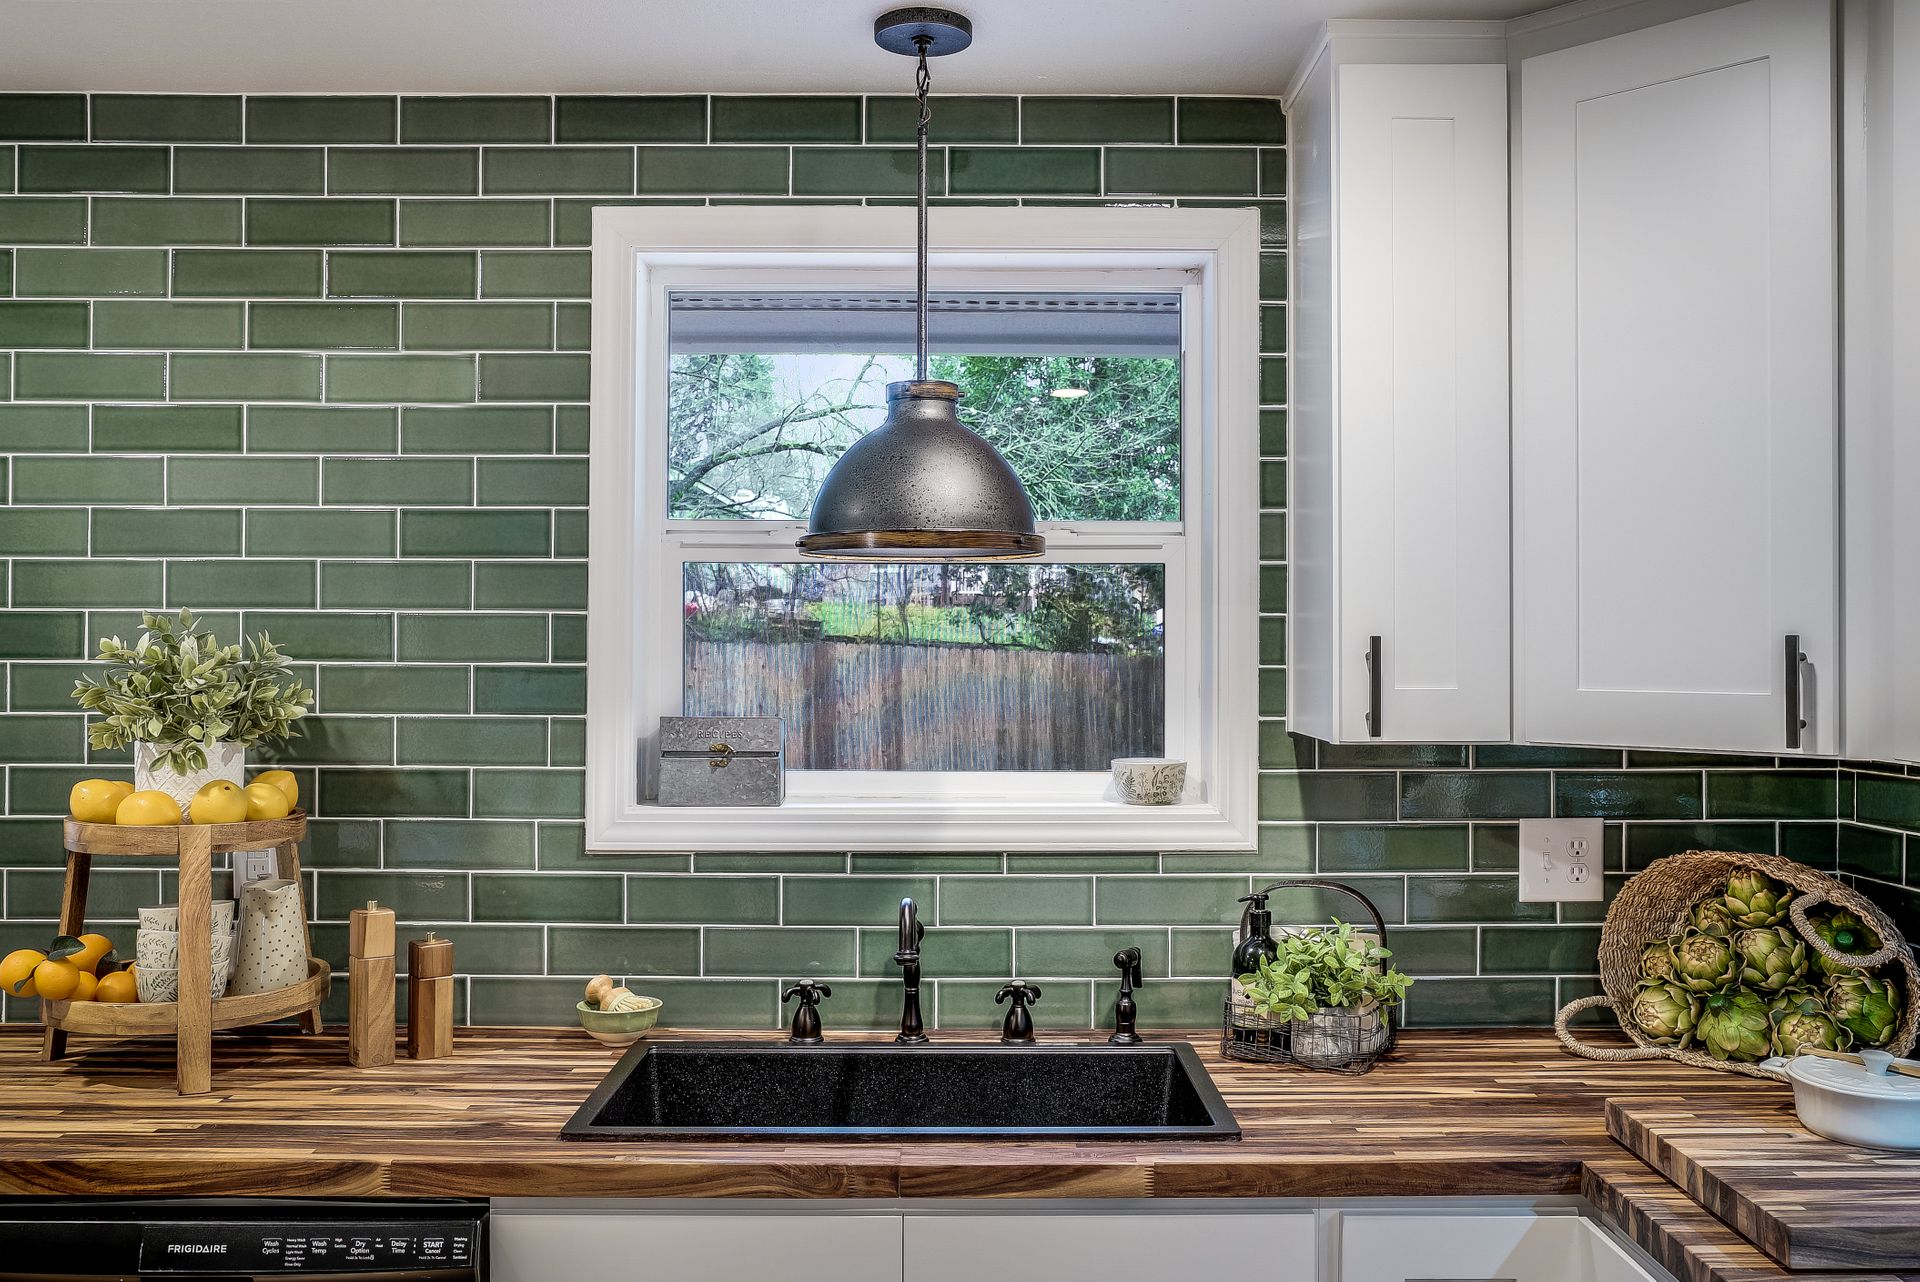 green kitchen sink and tile from professional kitchen contractors